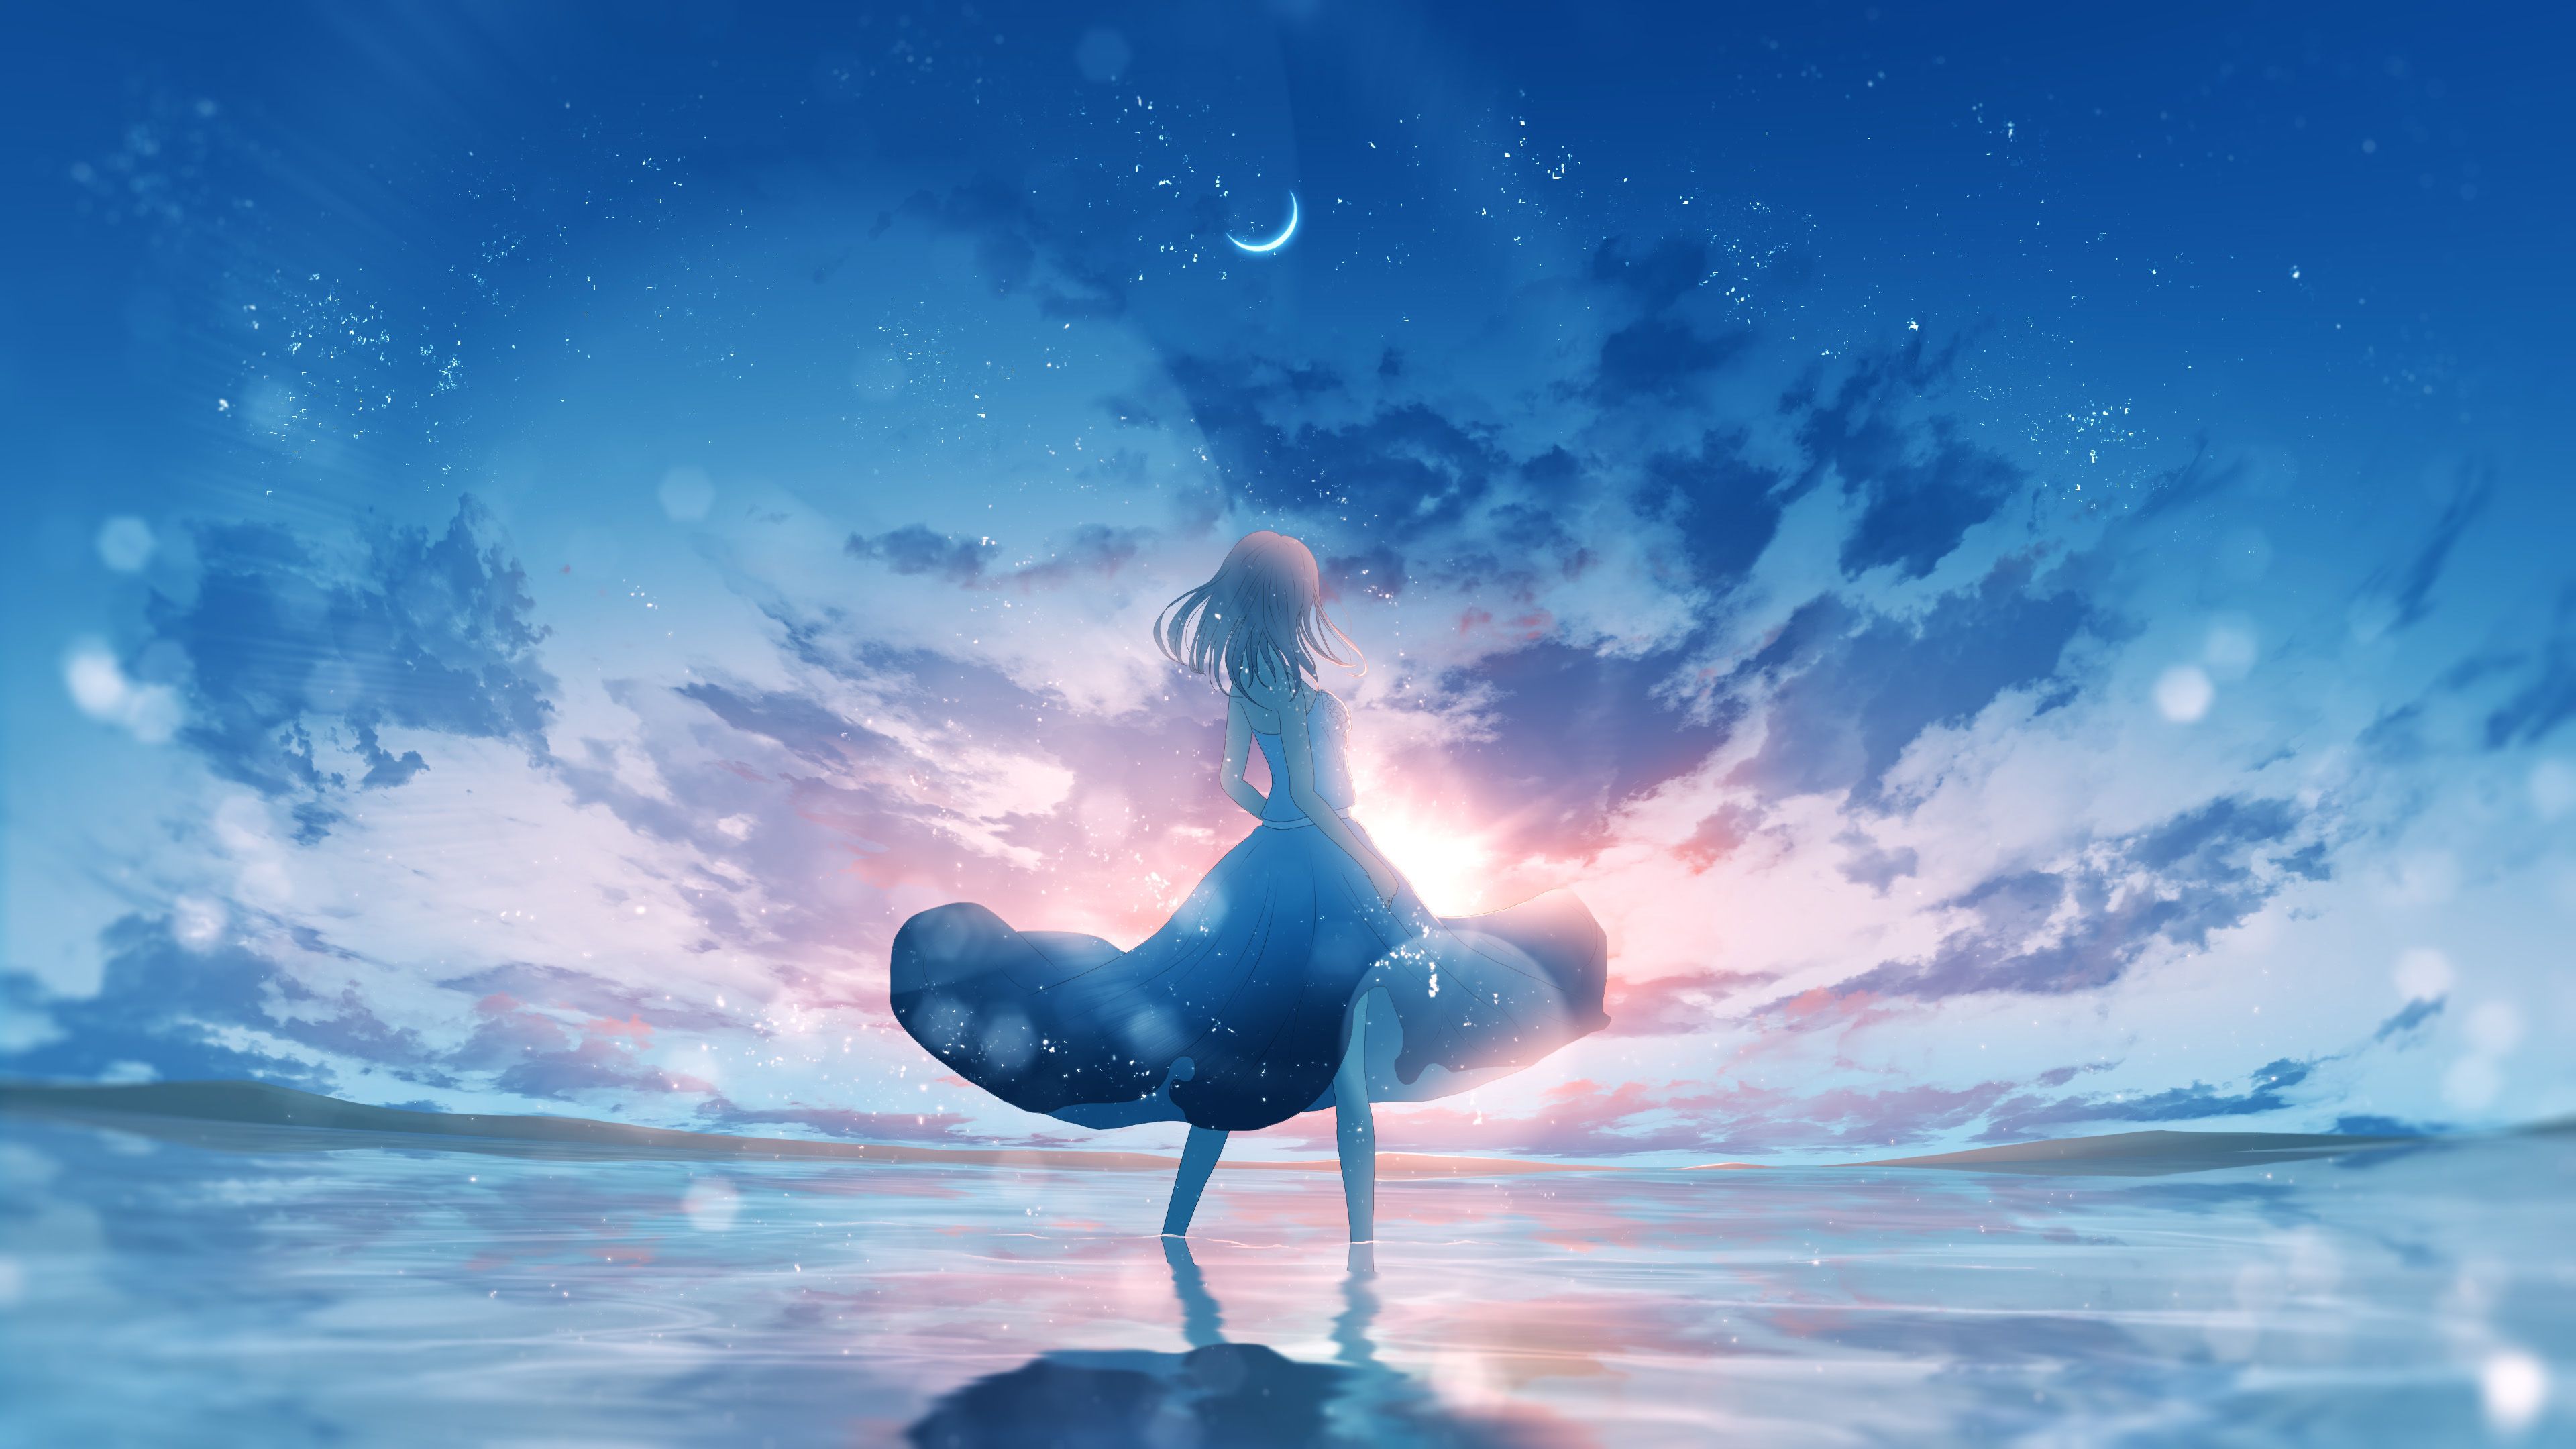 Anime girl standing in the sea under the moonlight - Blue anime, happy